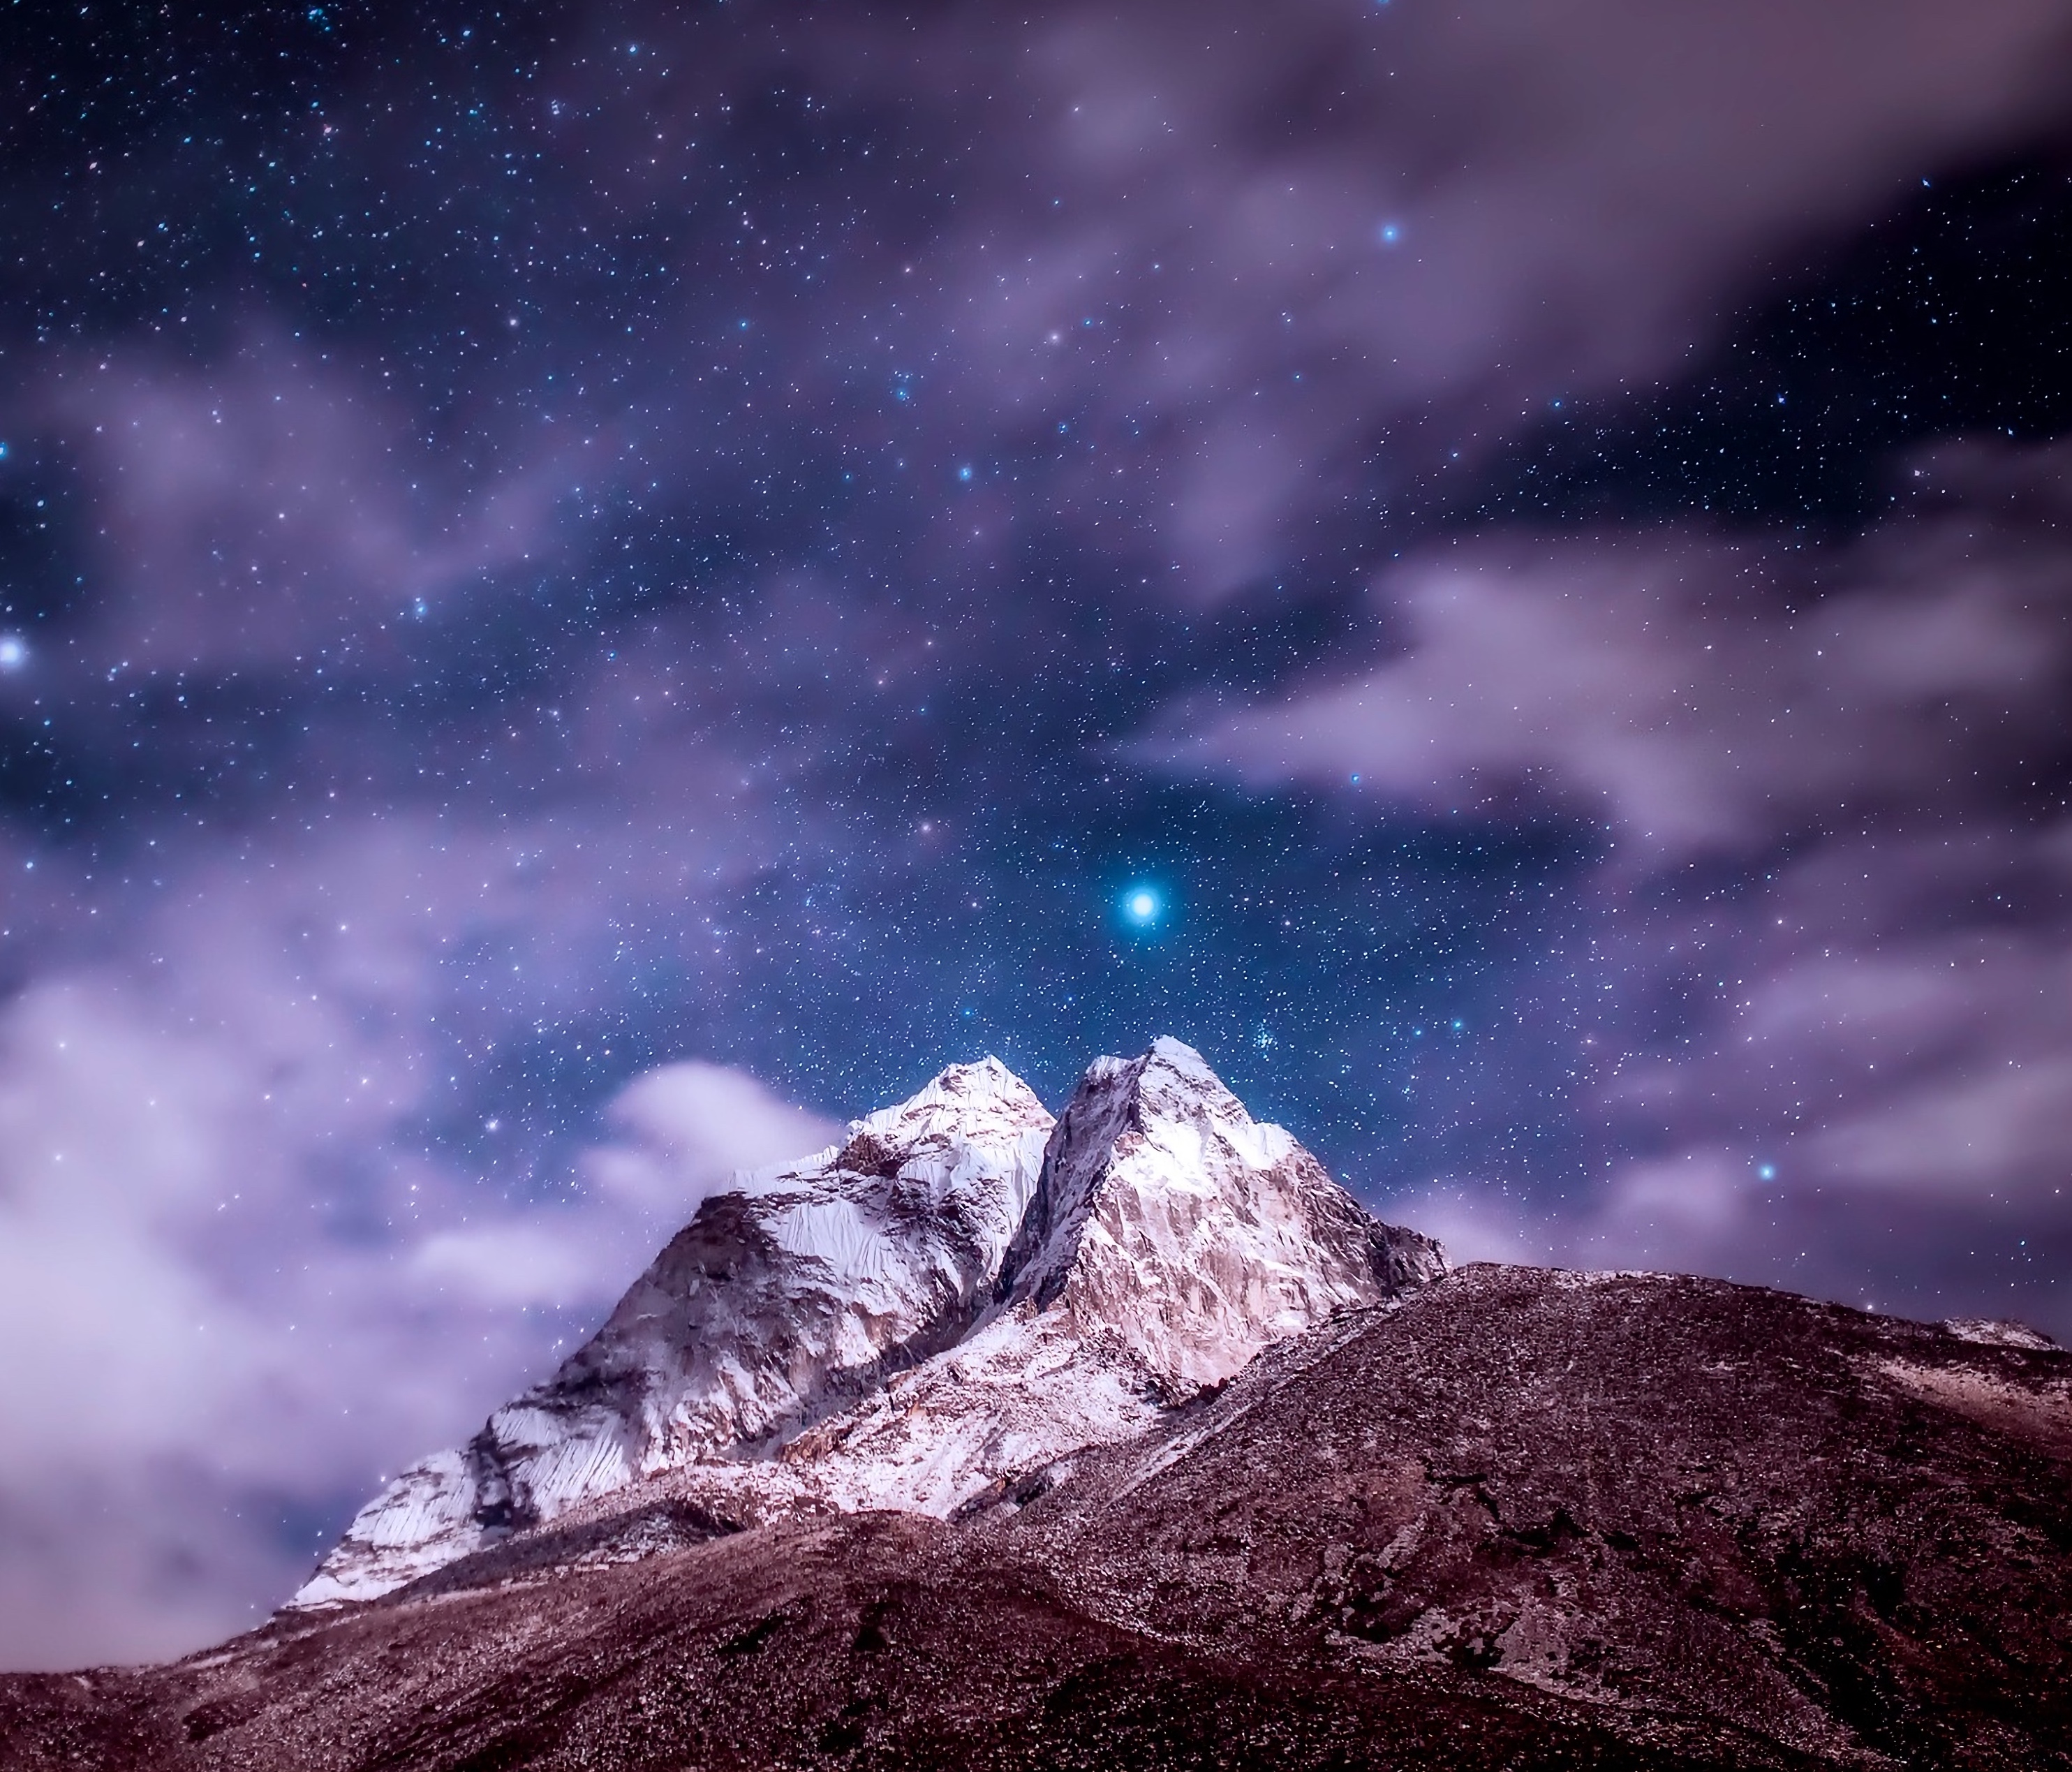 himalayas, clouds, starry sky, nature, snow covered, mountains, vertex, top, snowbound